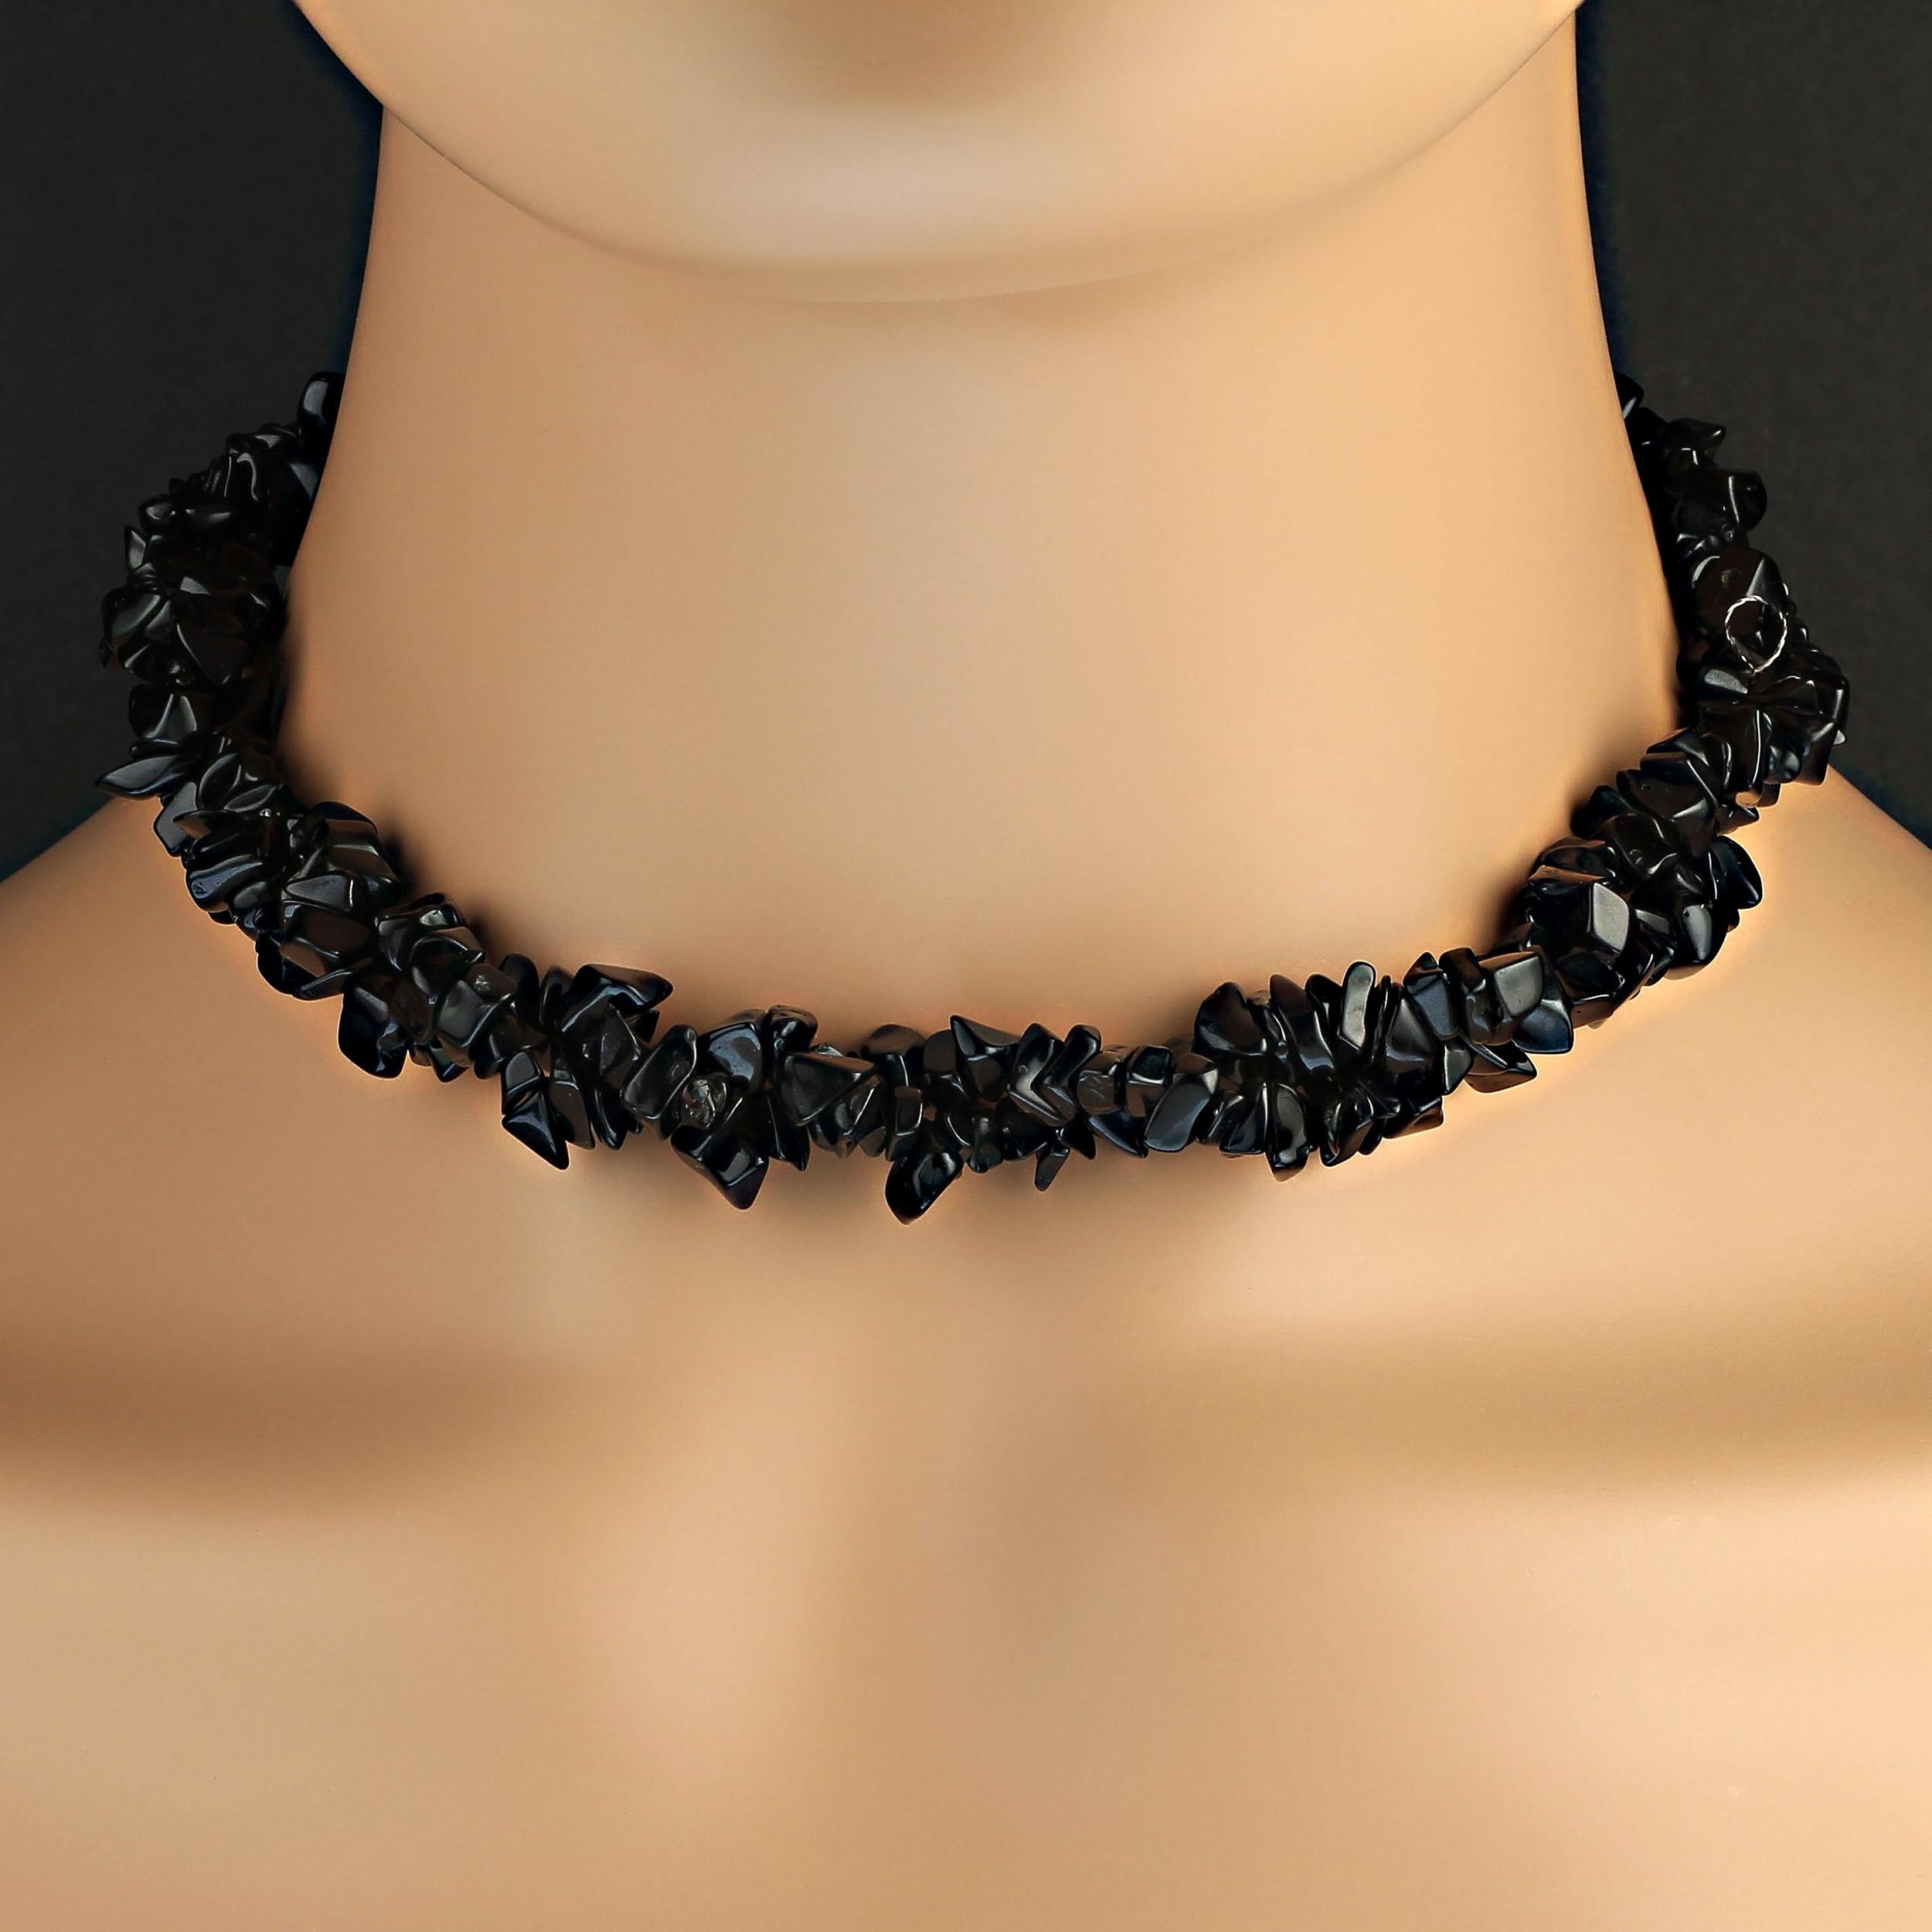 Highly polished Black Onyx chip infinity necklace of 36 inches.  This is one of those versatile pieces to add to your wardrobe that finishes so many other pieces, wrap it, tie it, wrap and tie, etc. 